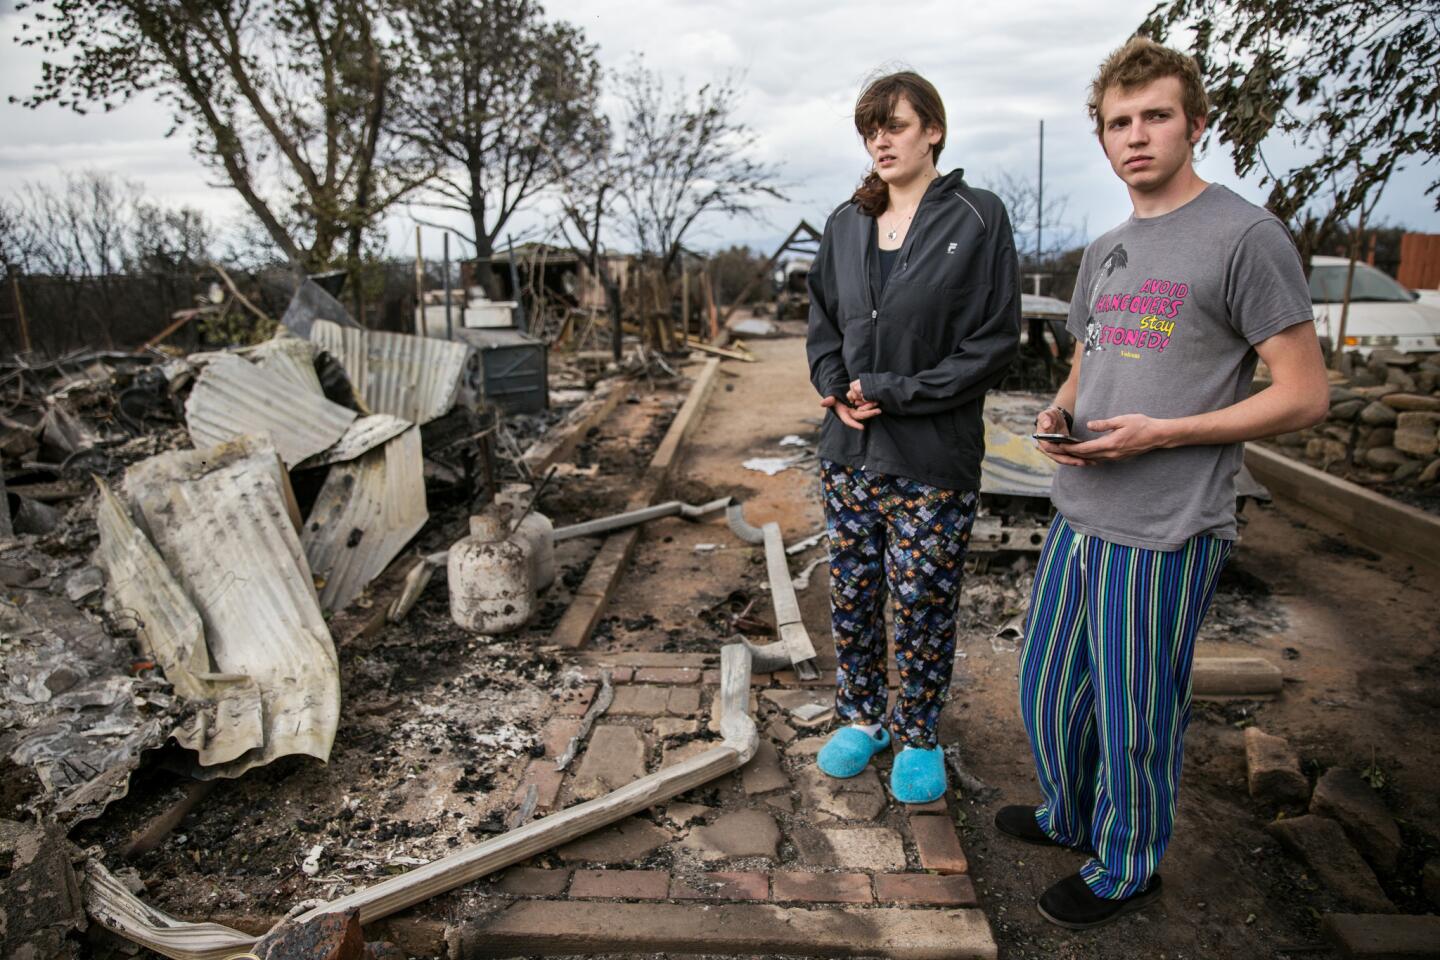 Andrew Eblen and his fiancee, Britany Carpenter, examine the ruins of their home, which was destroyed in the North fire. The couple recently renovated the home, Eblen's childhood residence, and was going to move in in a few months.